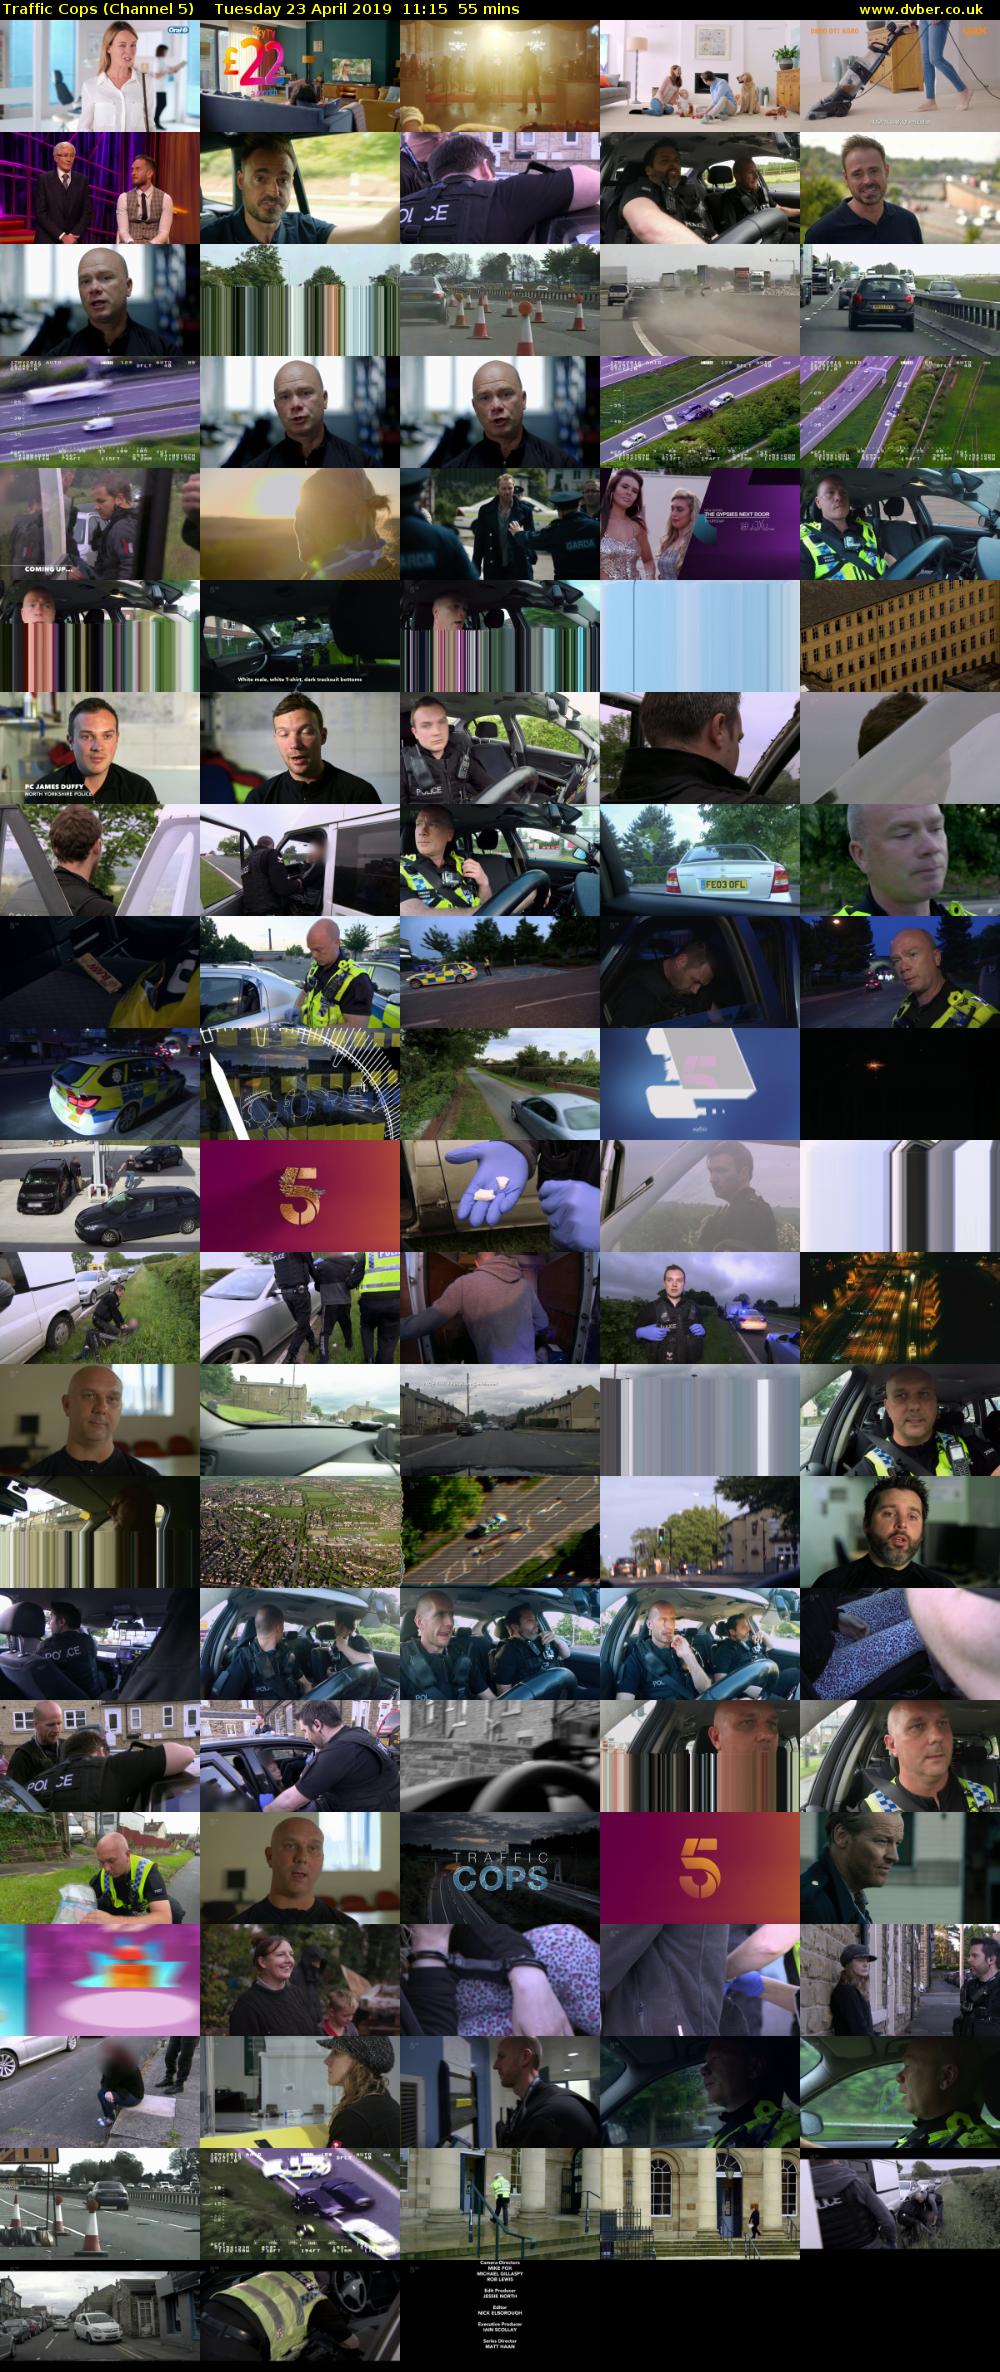 Traffic Cops (Channel 5) Tuesday 23 April 2019 11:15 - 12:10